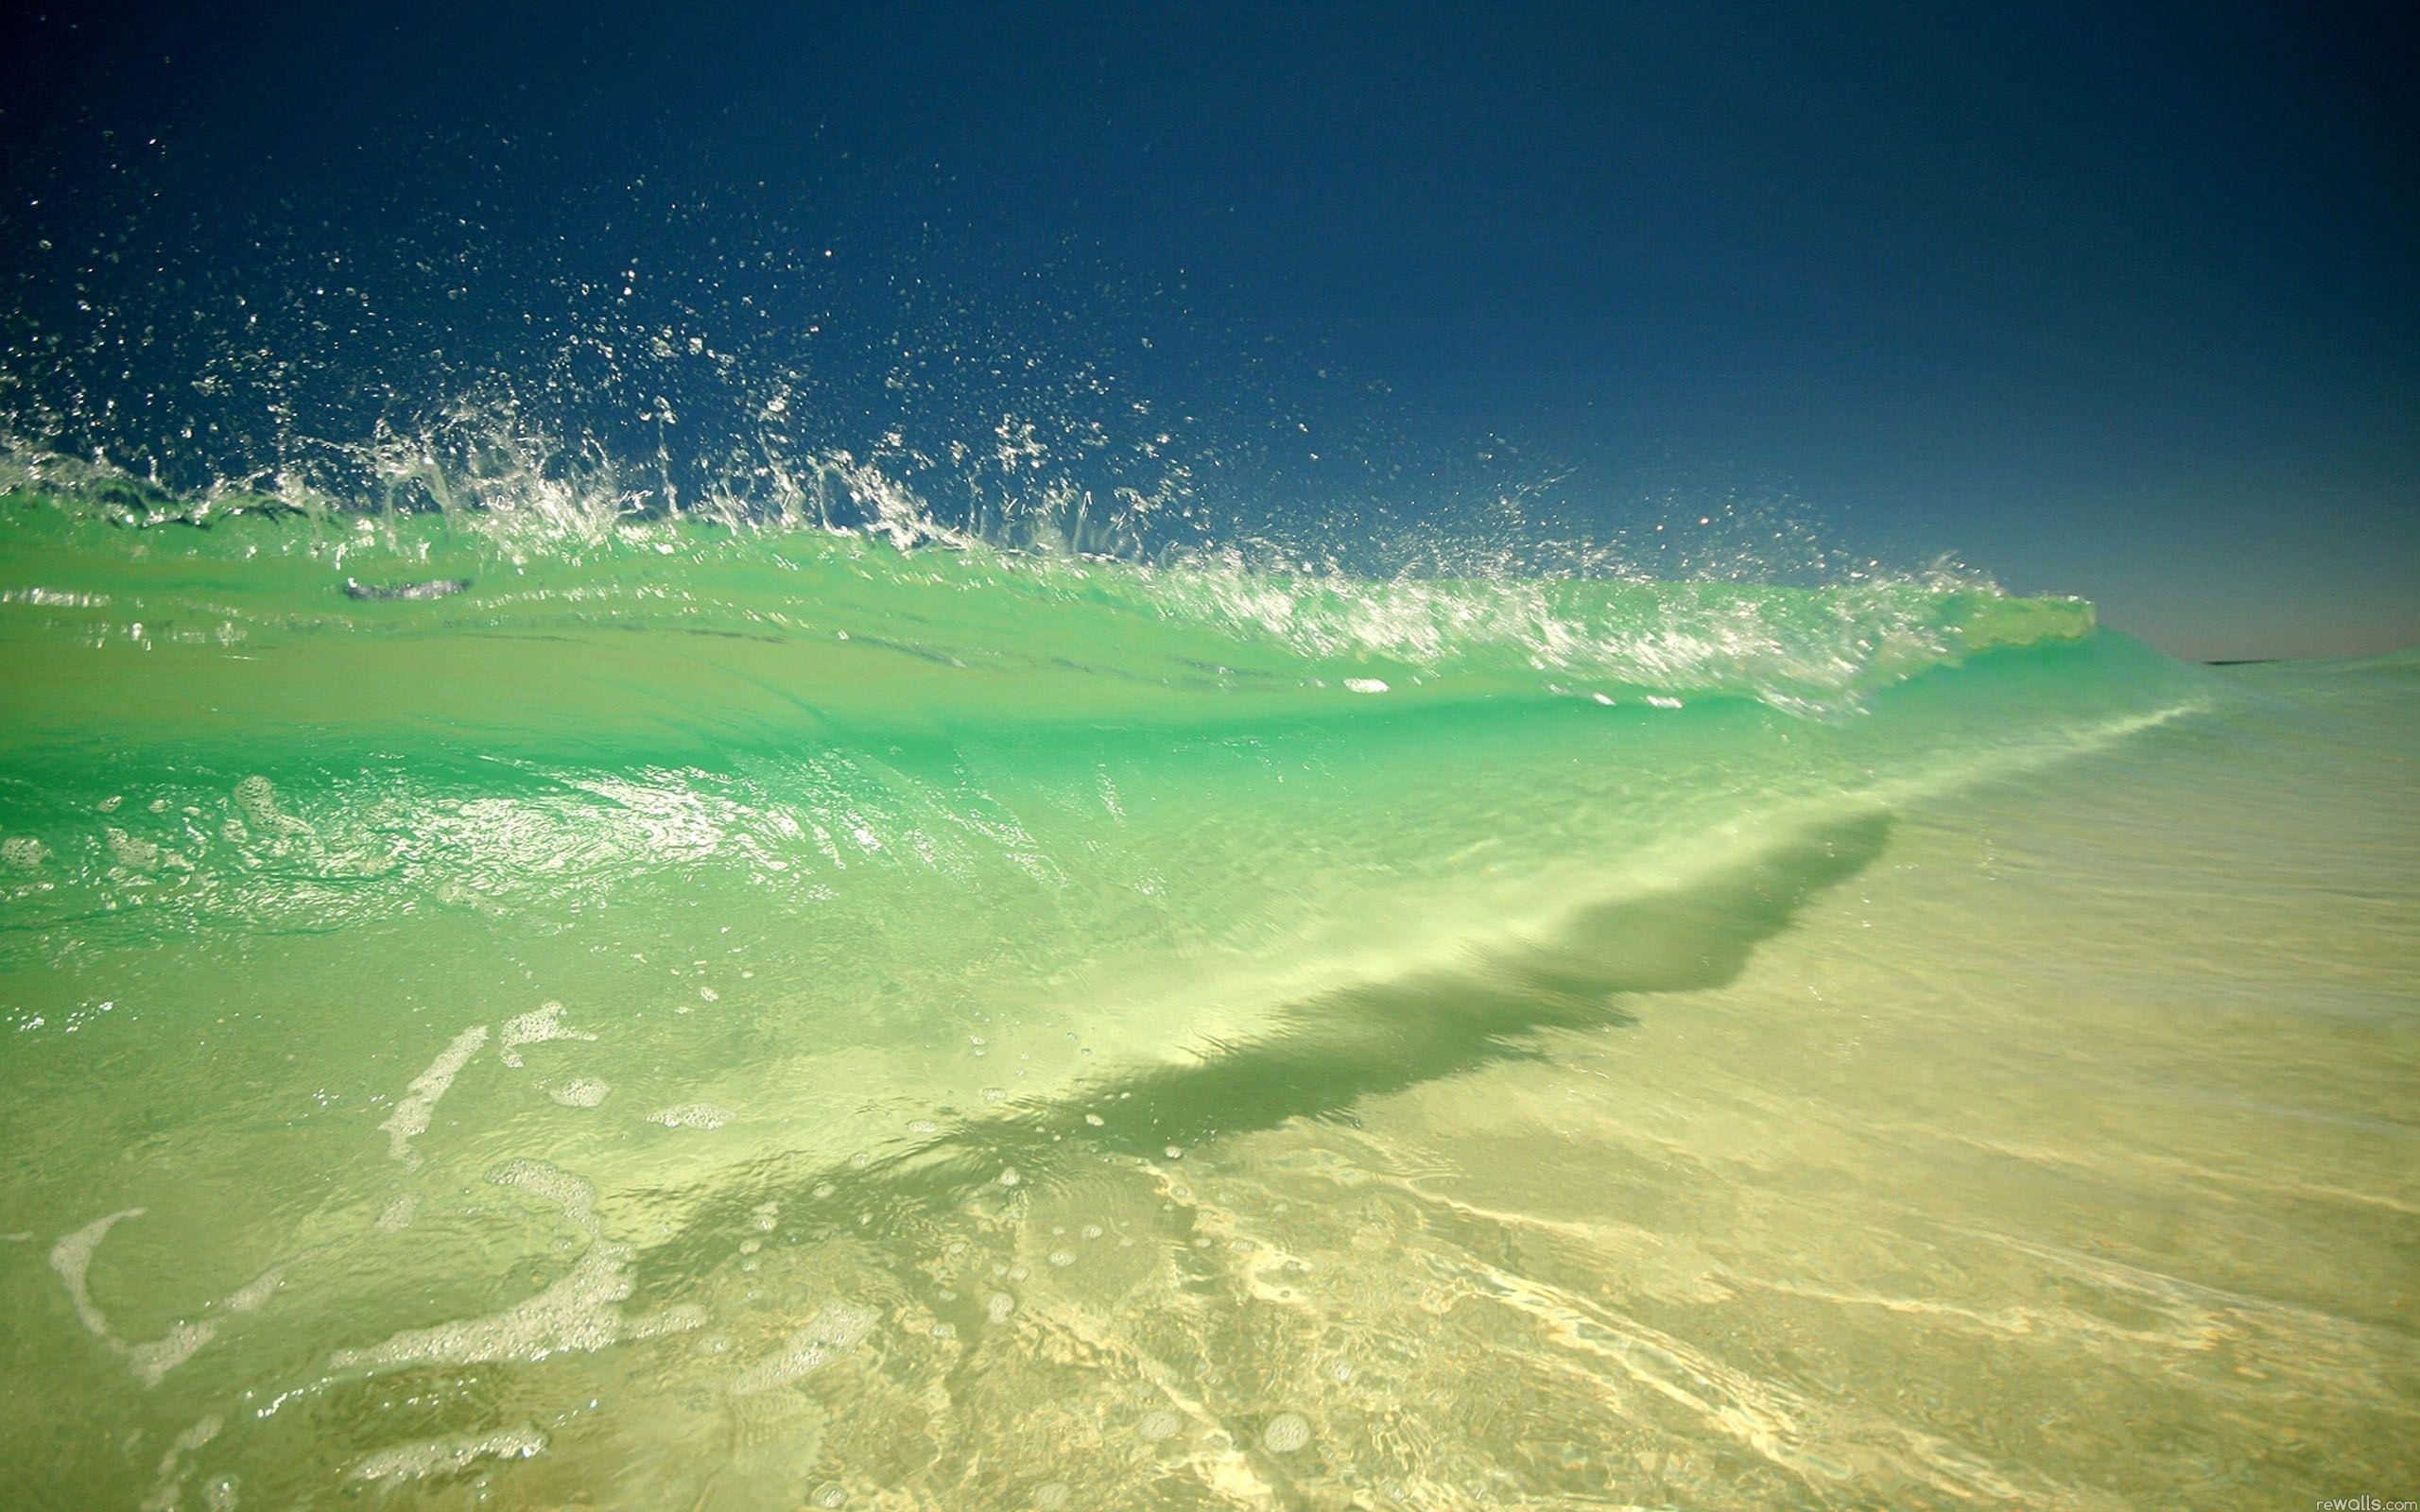 HD Beautiful Waves Wallpaper. Download Free. On the Beach